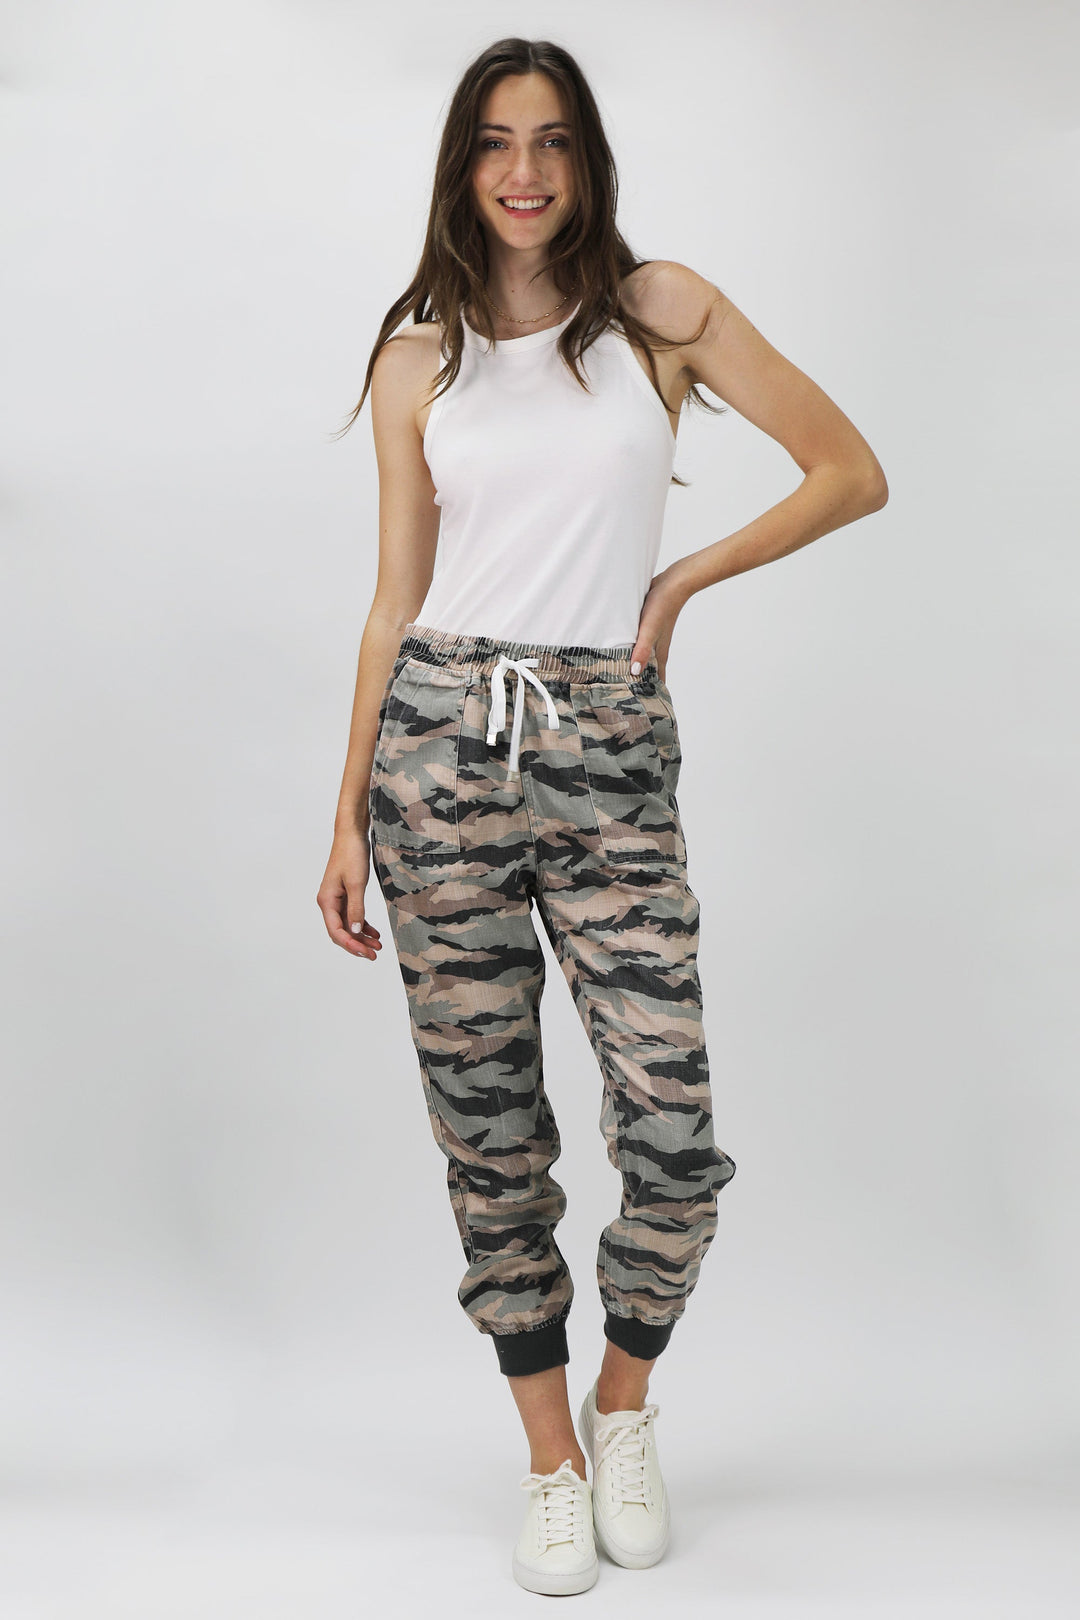 image of a female model wearing a JACEY SUPER HIGH RISE CROPPED JOGGER PANTS SAGE CAMO PANTS